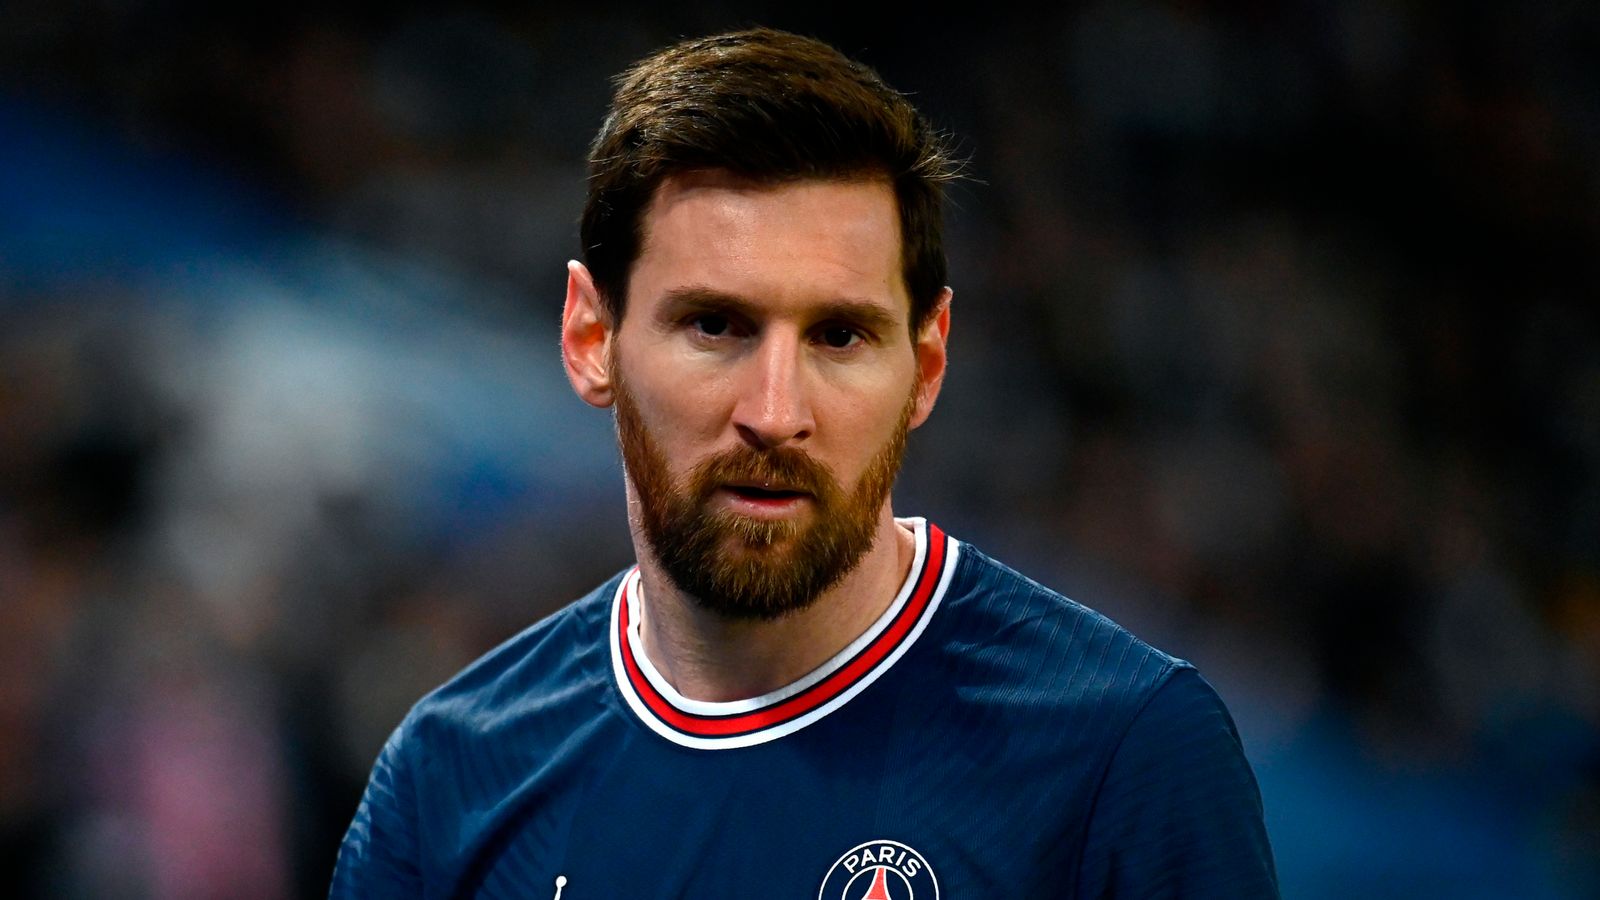 Lionel Messi: Paris Saint-Germain contract talks on hold until after 2022 World Cup